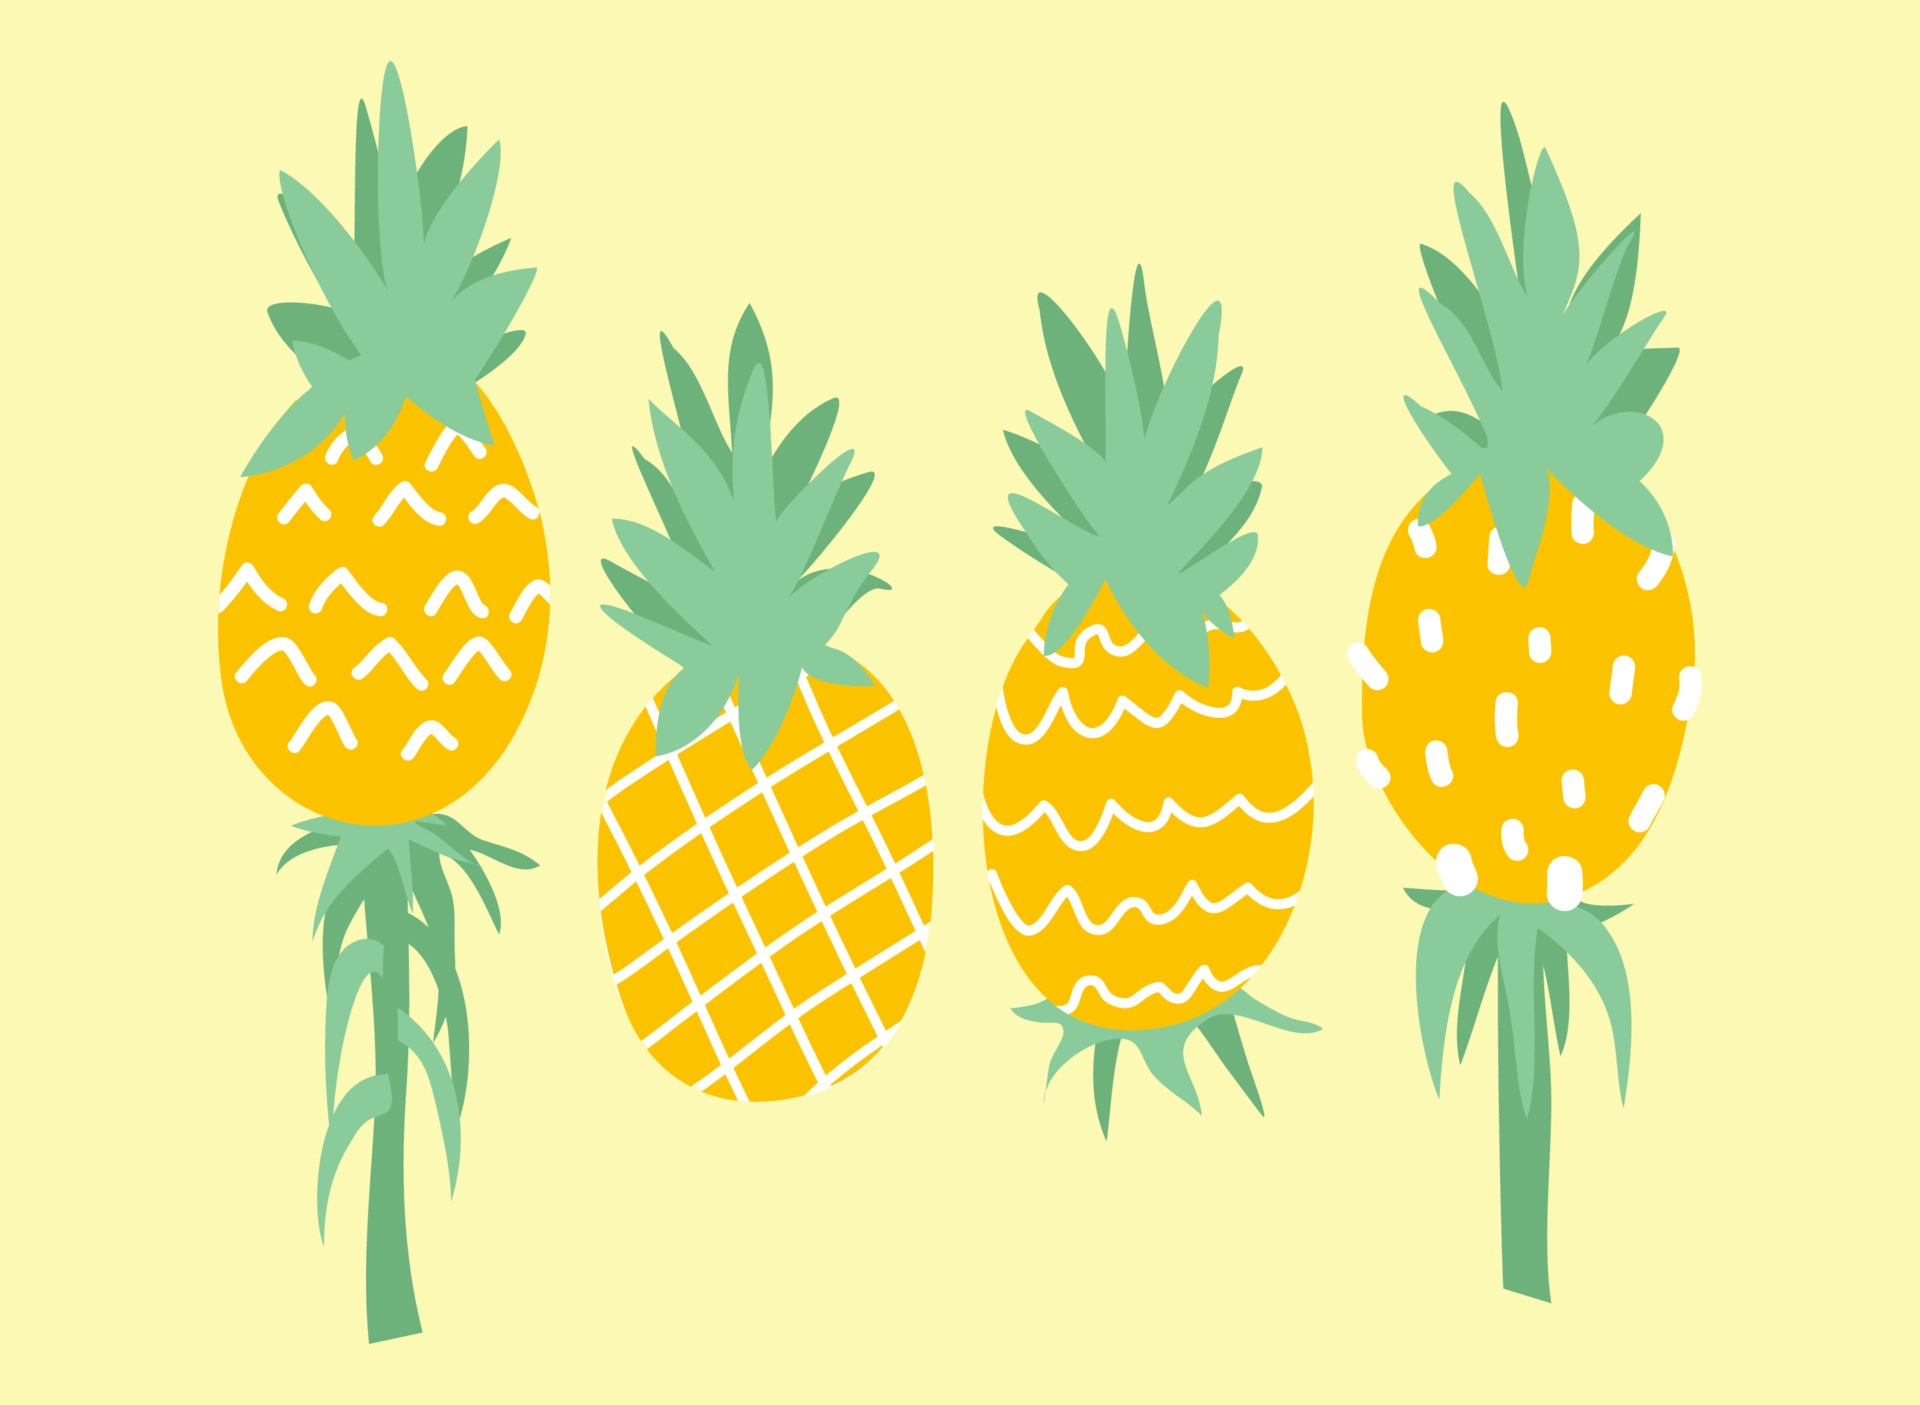 1920x1405 Ripe Yellow Pineapple Wallpaper For Phone. Pineapple Vector Illustration Pattern On Isolated Yellow Background. 3584337 Vector Art